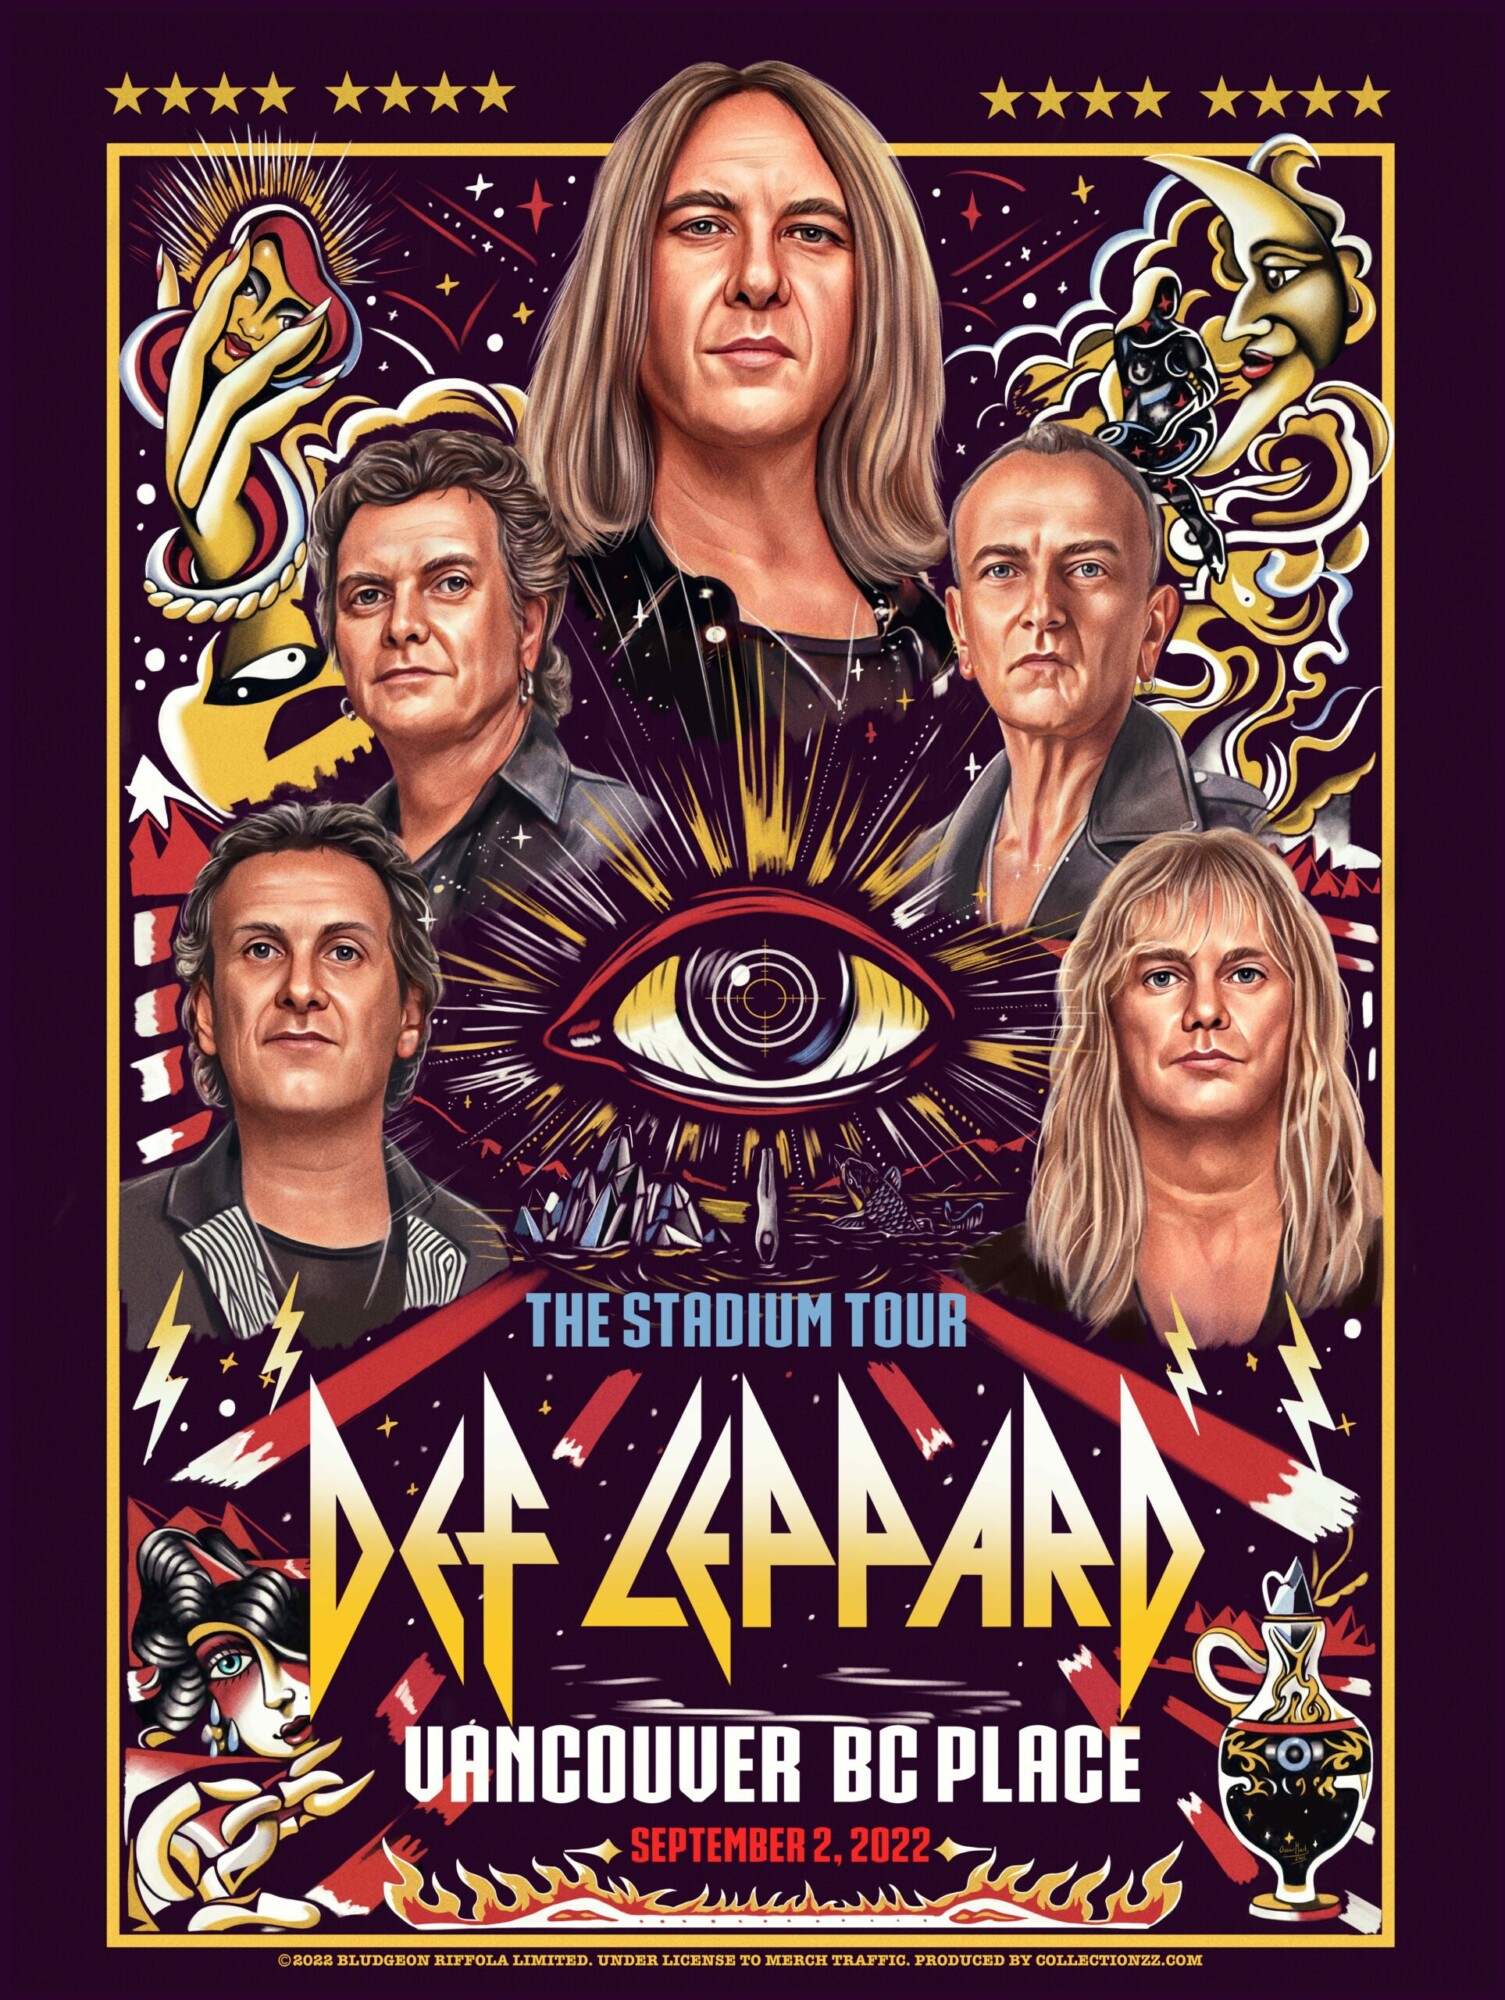 def leppard tour posters